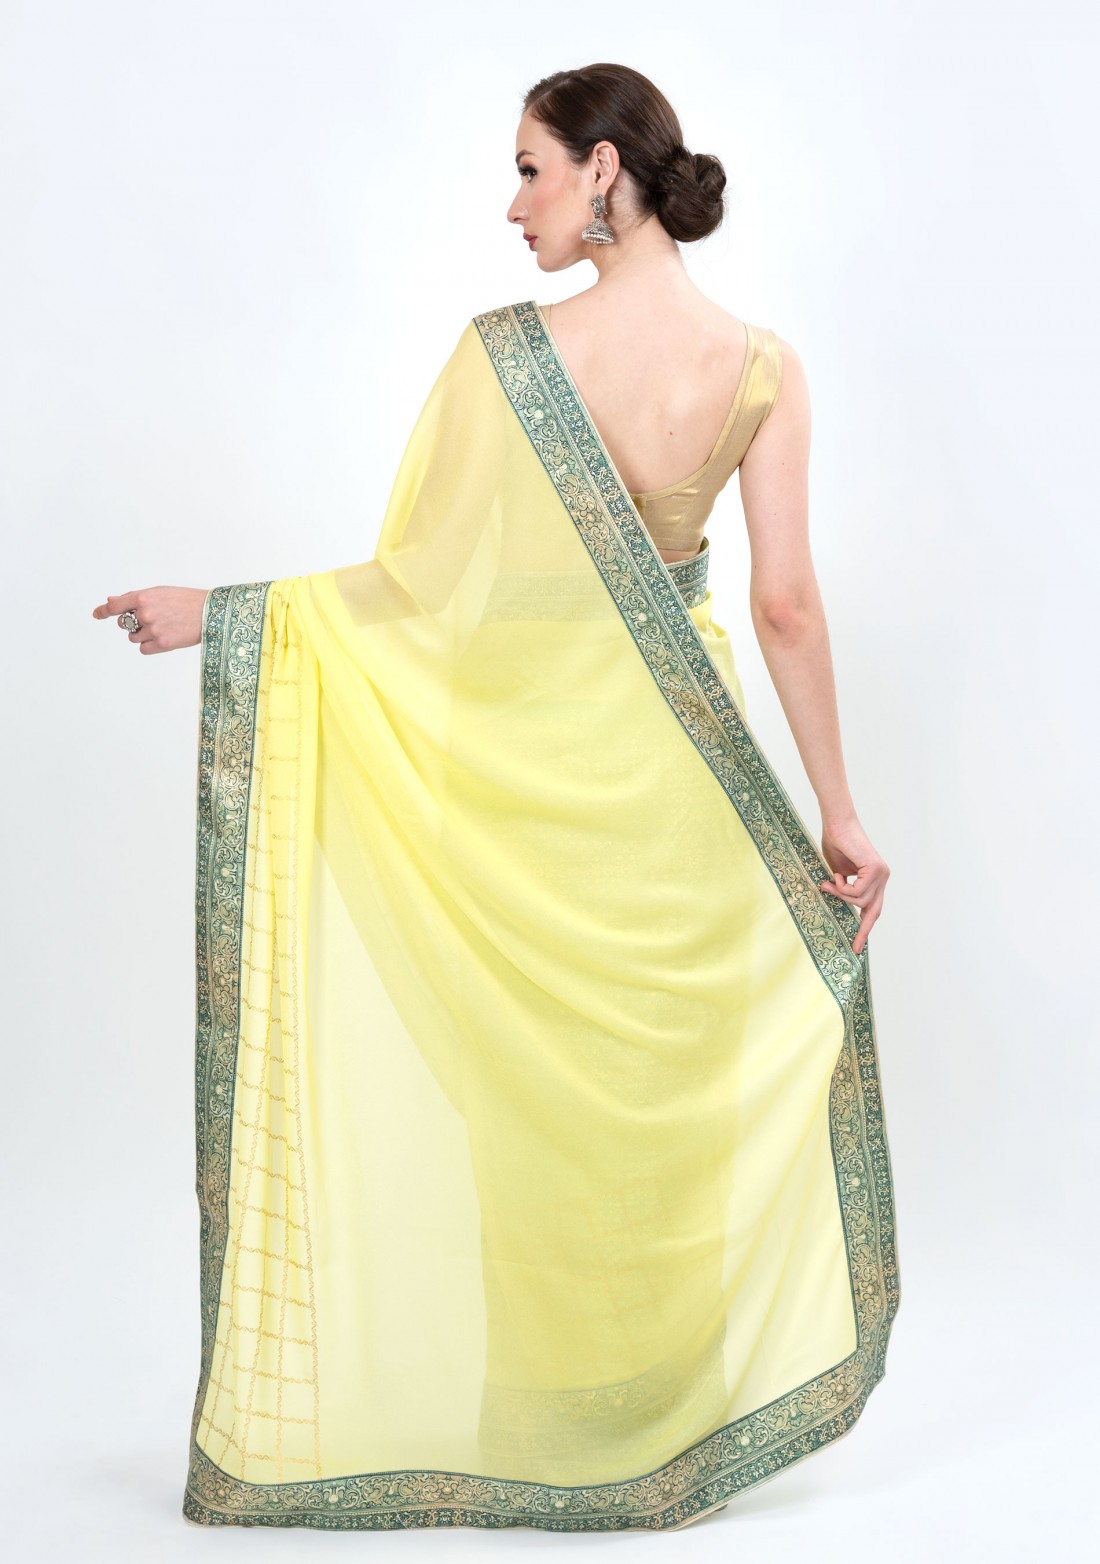 Delicate Light Yellow Foil Printed Georgette Saree